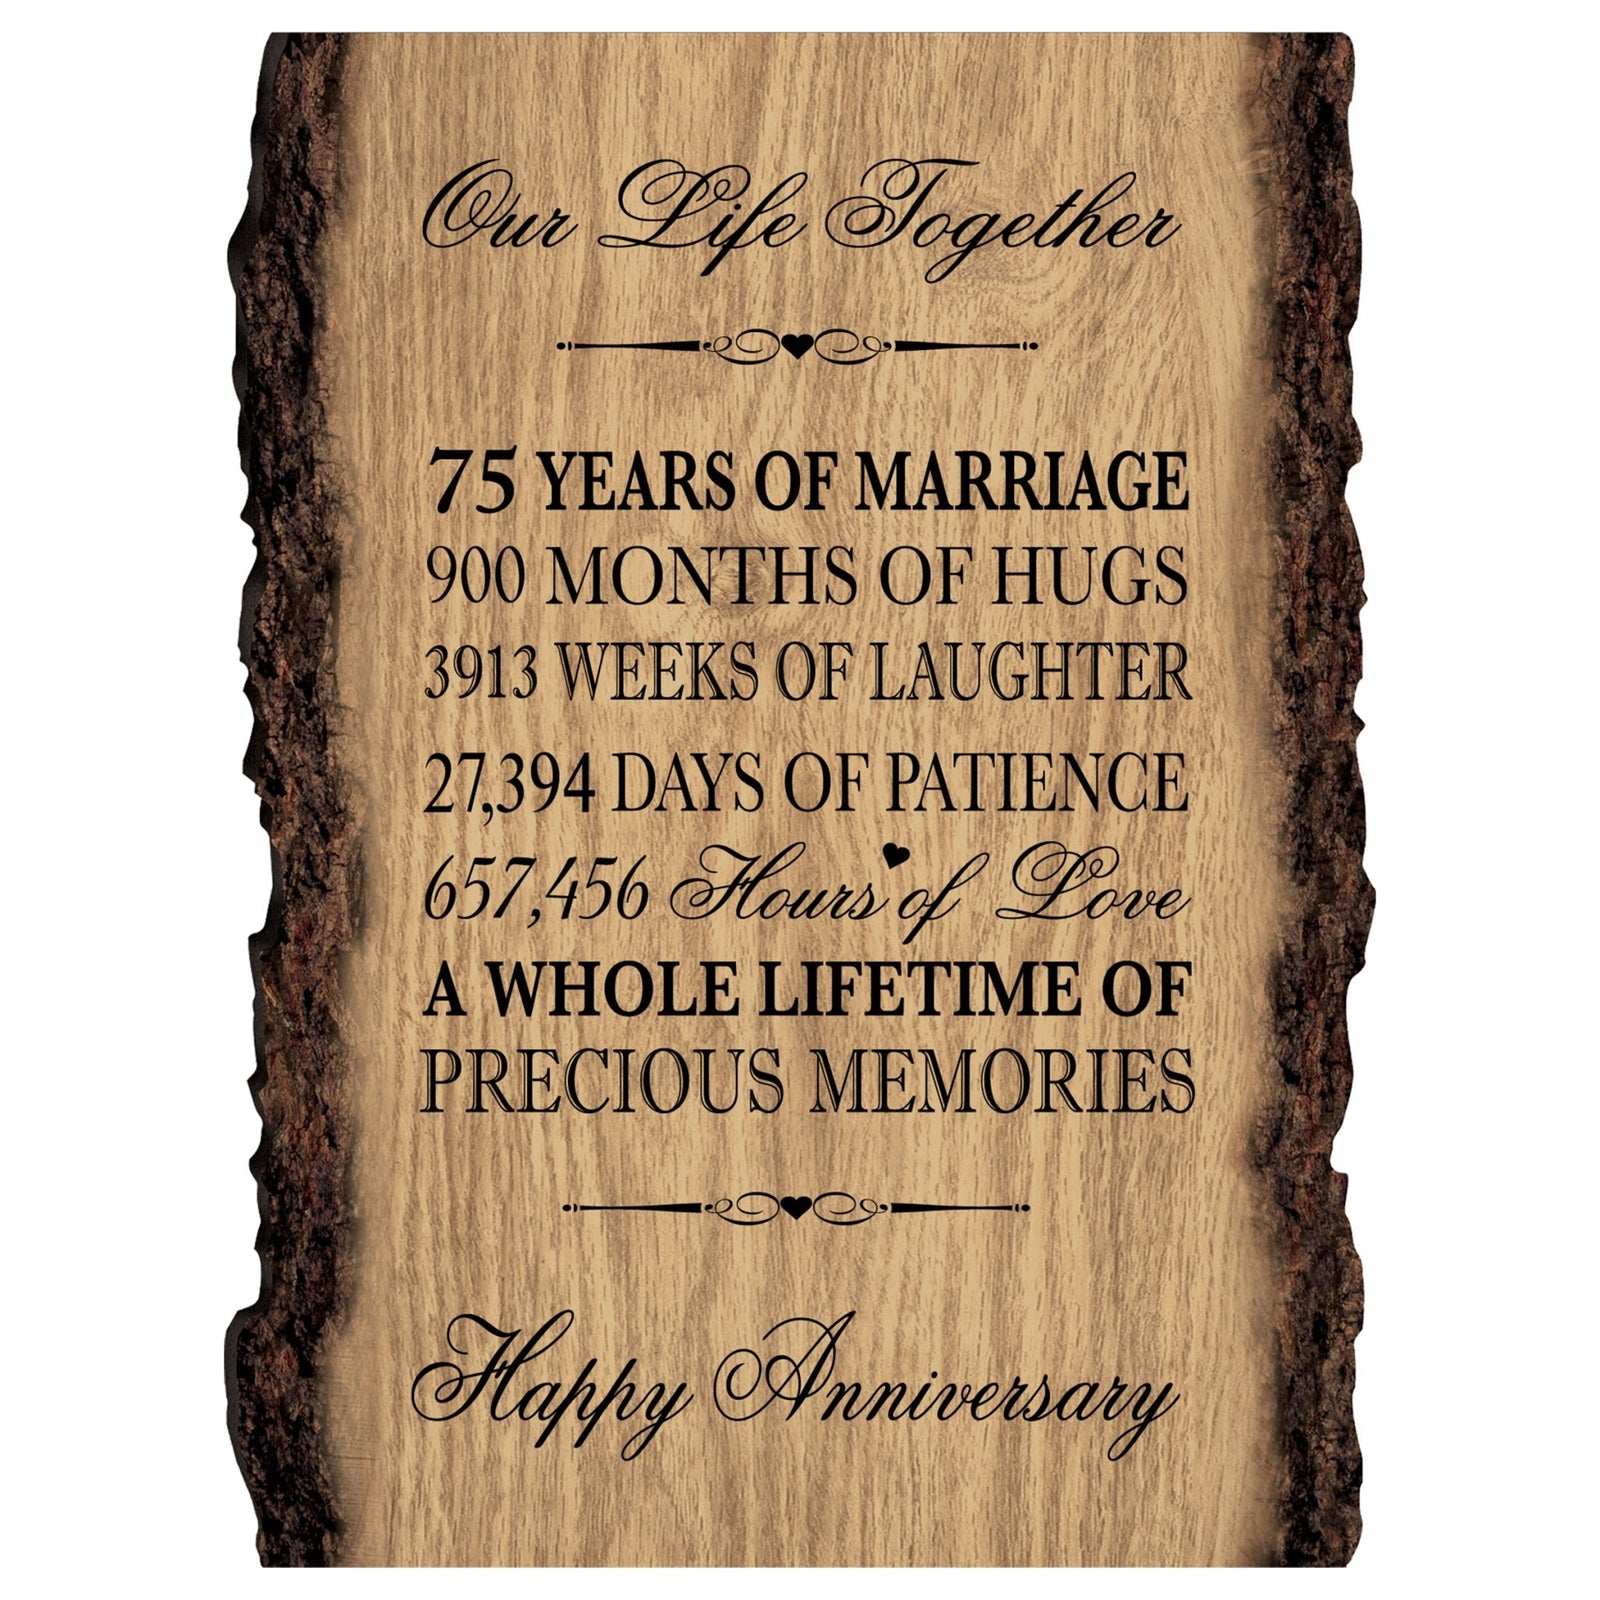 Rustic Wedding Anniversary 9x12 Barky Wall Plaque Gift For Parents, Grandparents New Couple - 75 Years Of Marriage - LifeSong Milestones